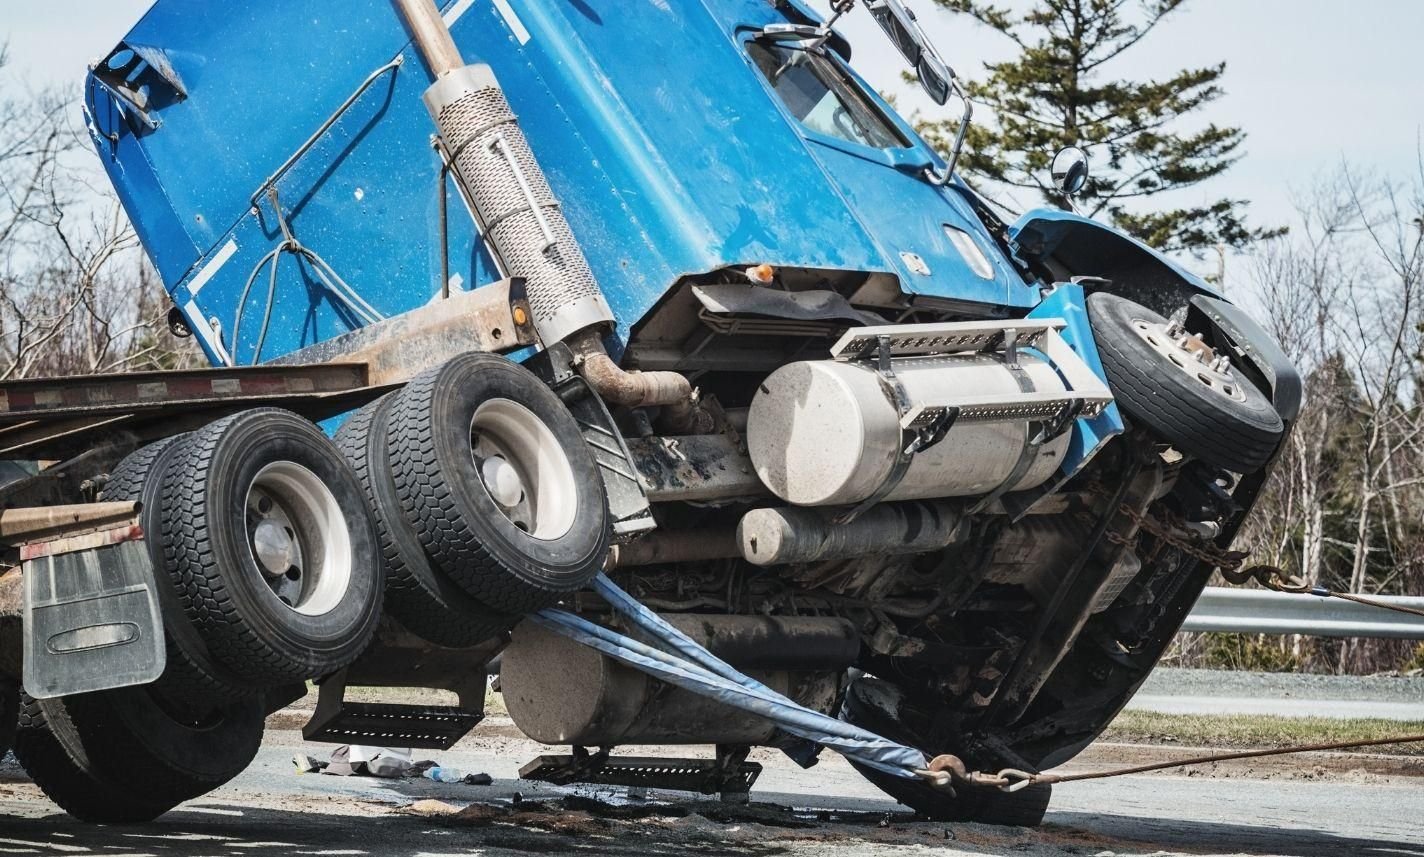 stone-mountain-commercial-truck-accident-injury-lawyer